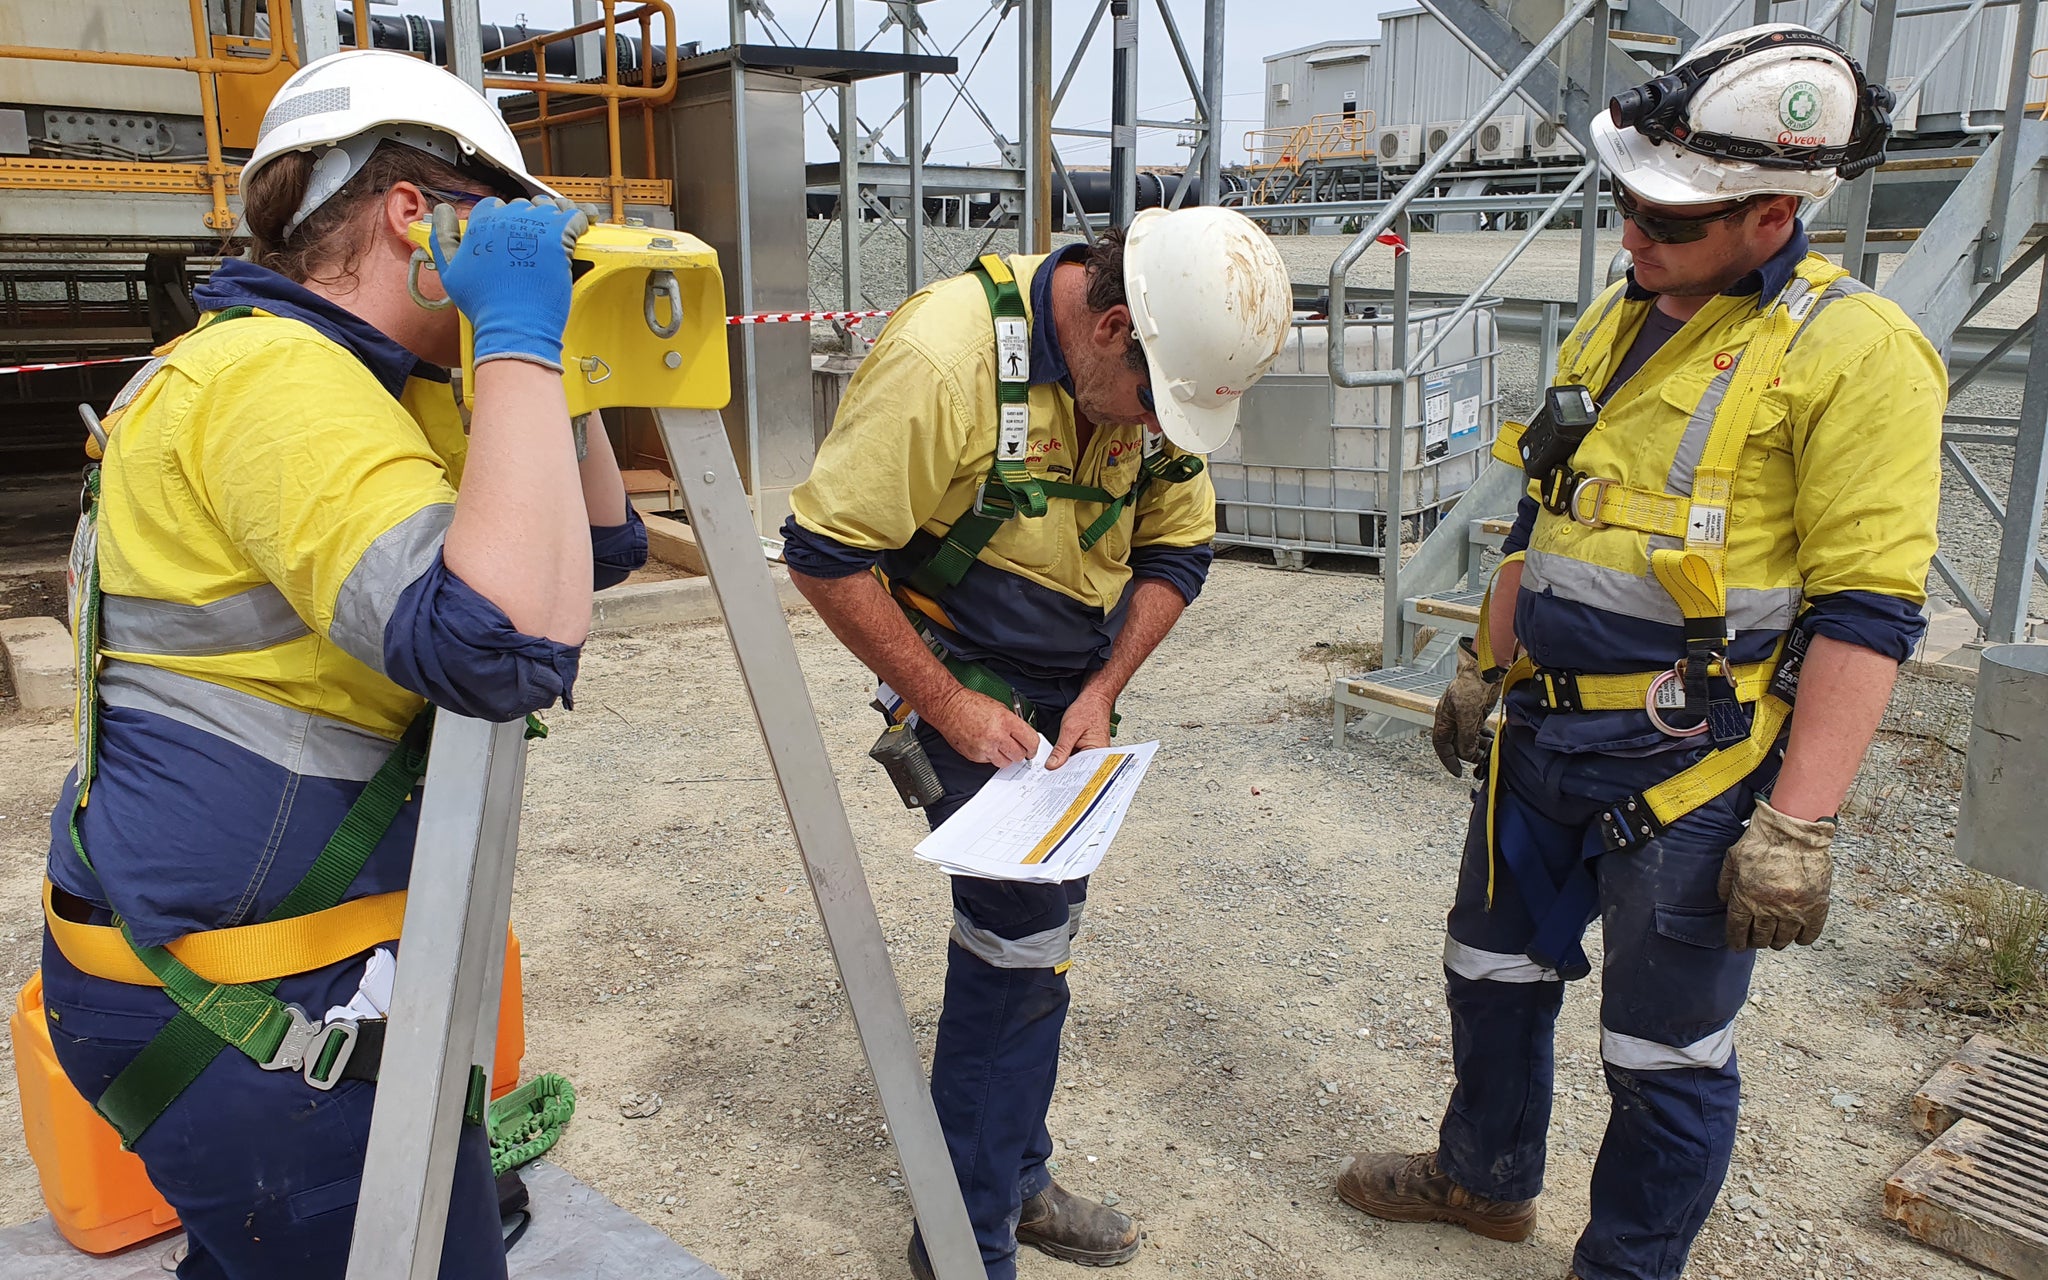 Perform inspections on height safety equipment